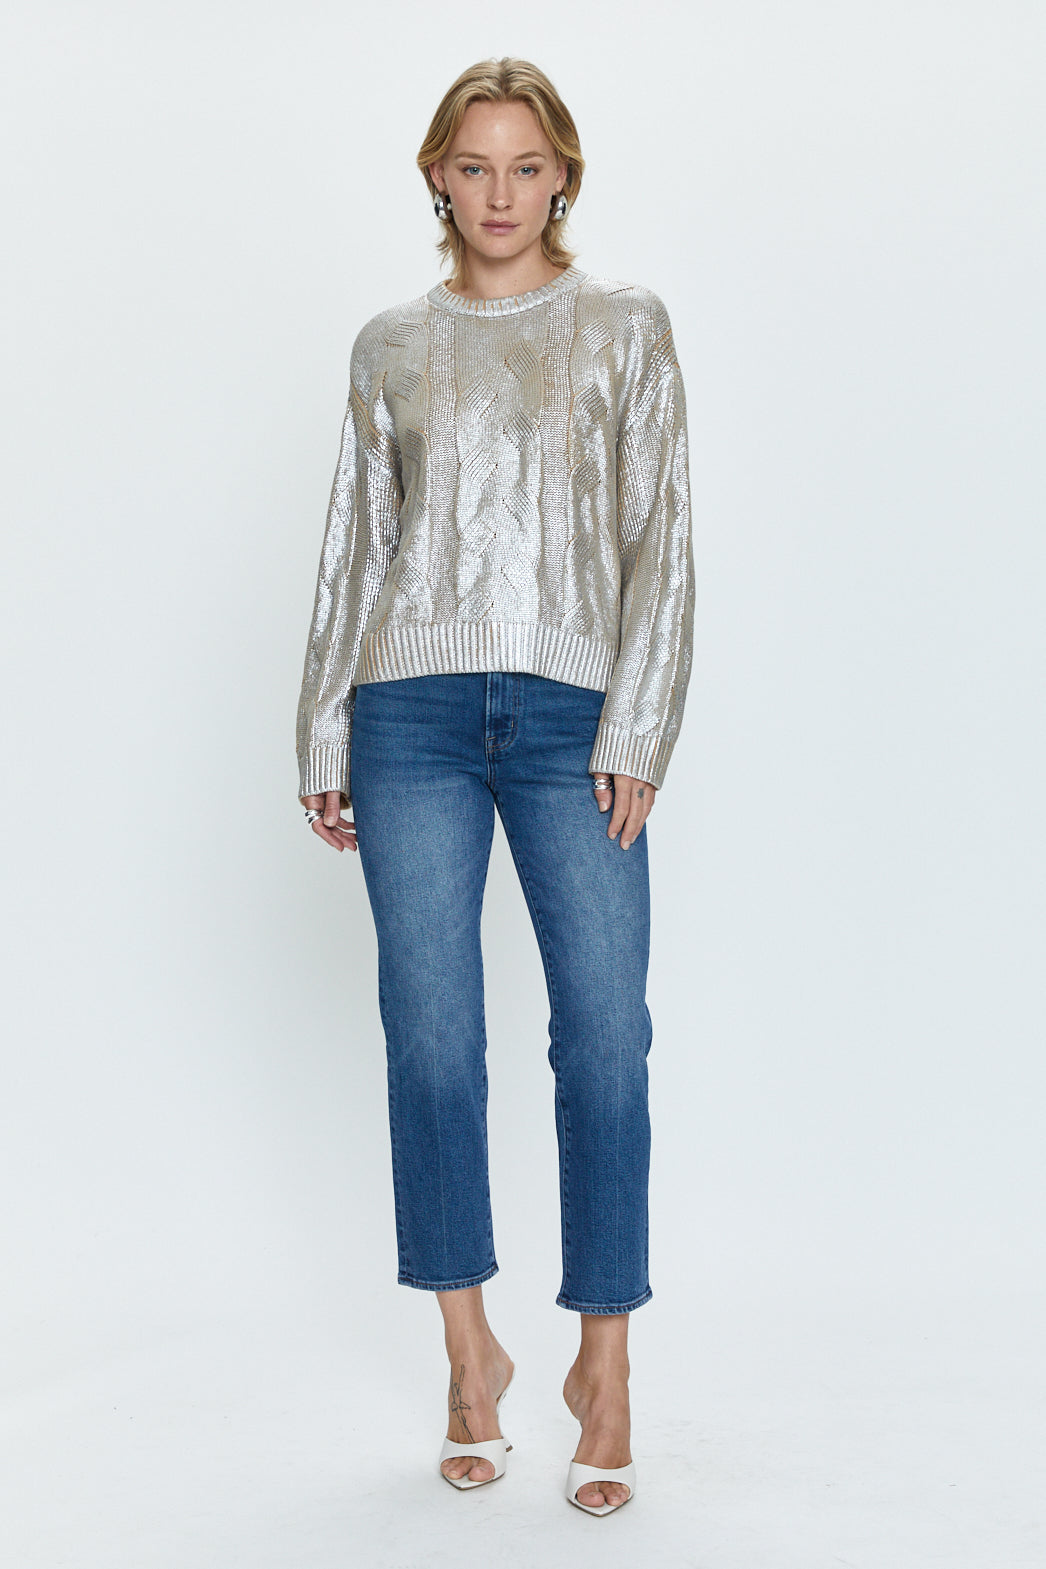 Everly Cable Sweater - Gilded Castle